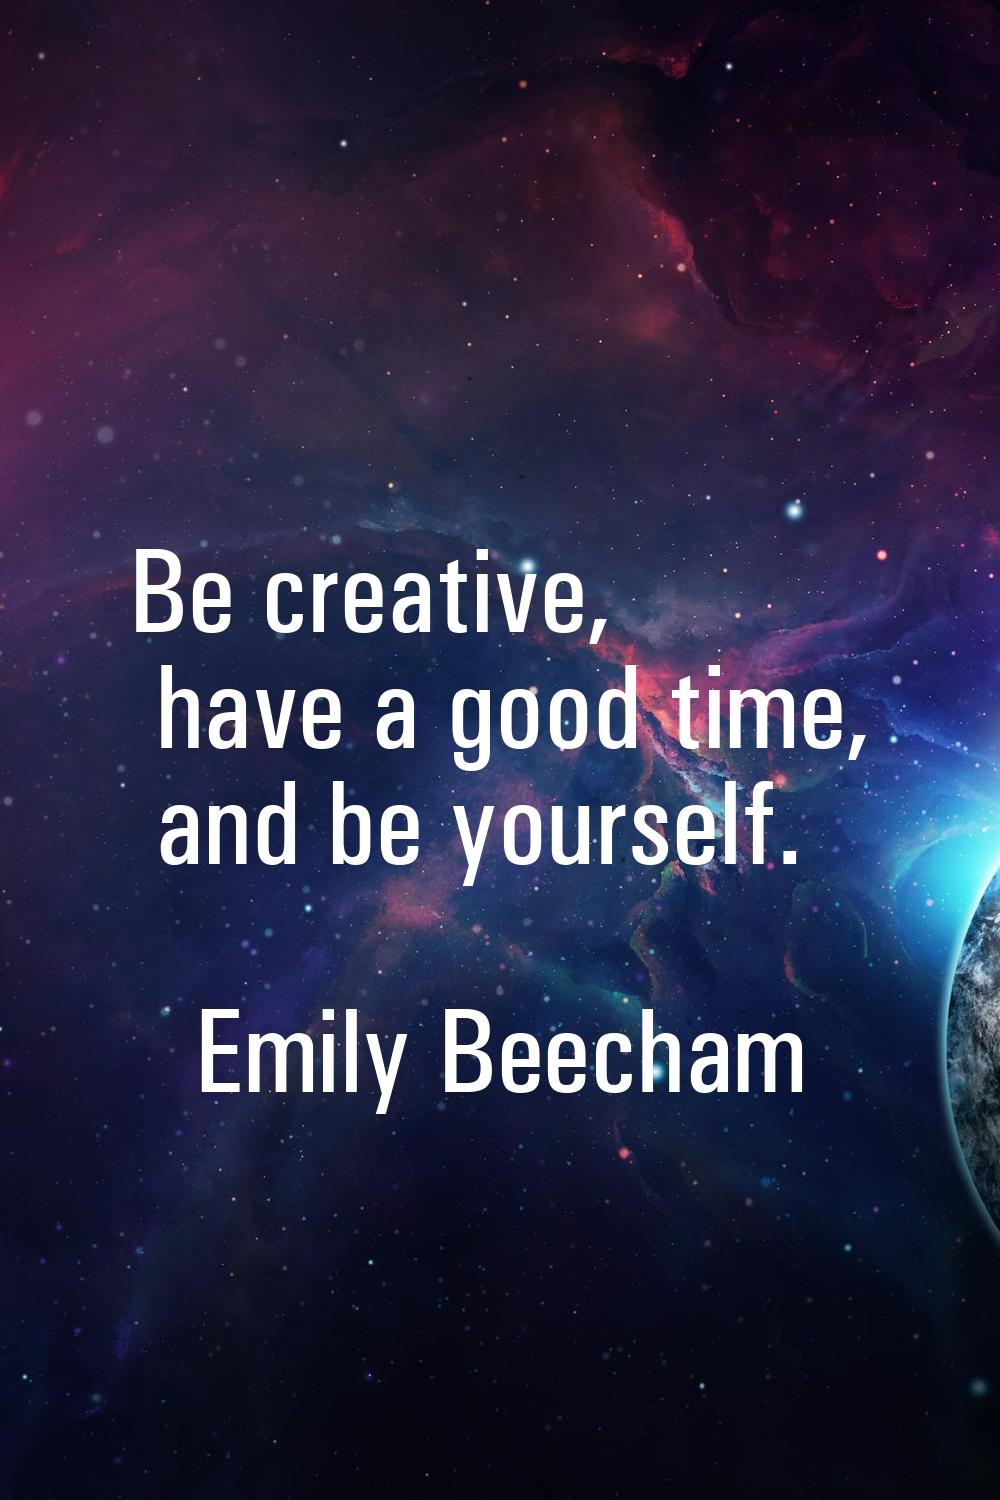 Be creative, have a good time, and be yourself.